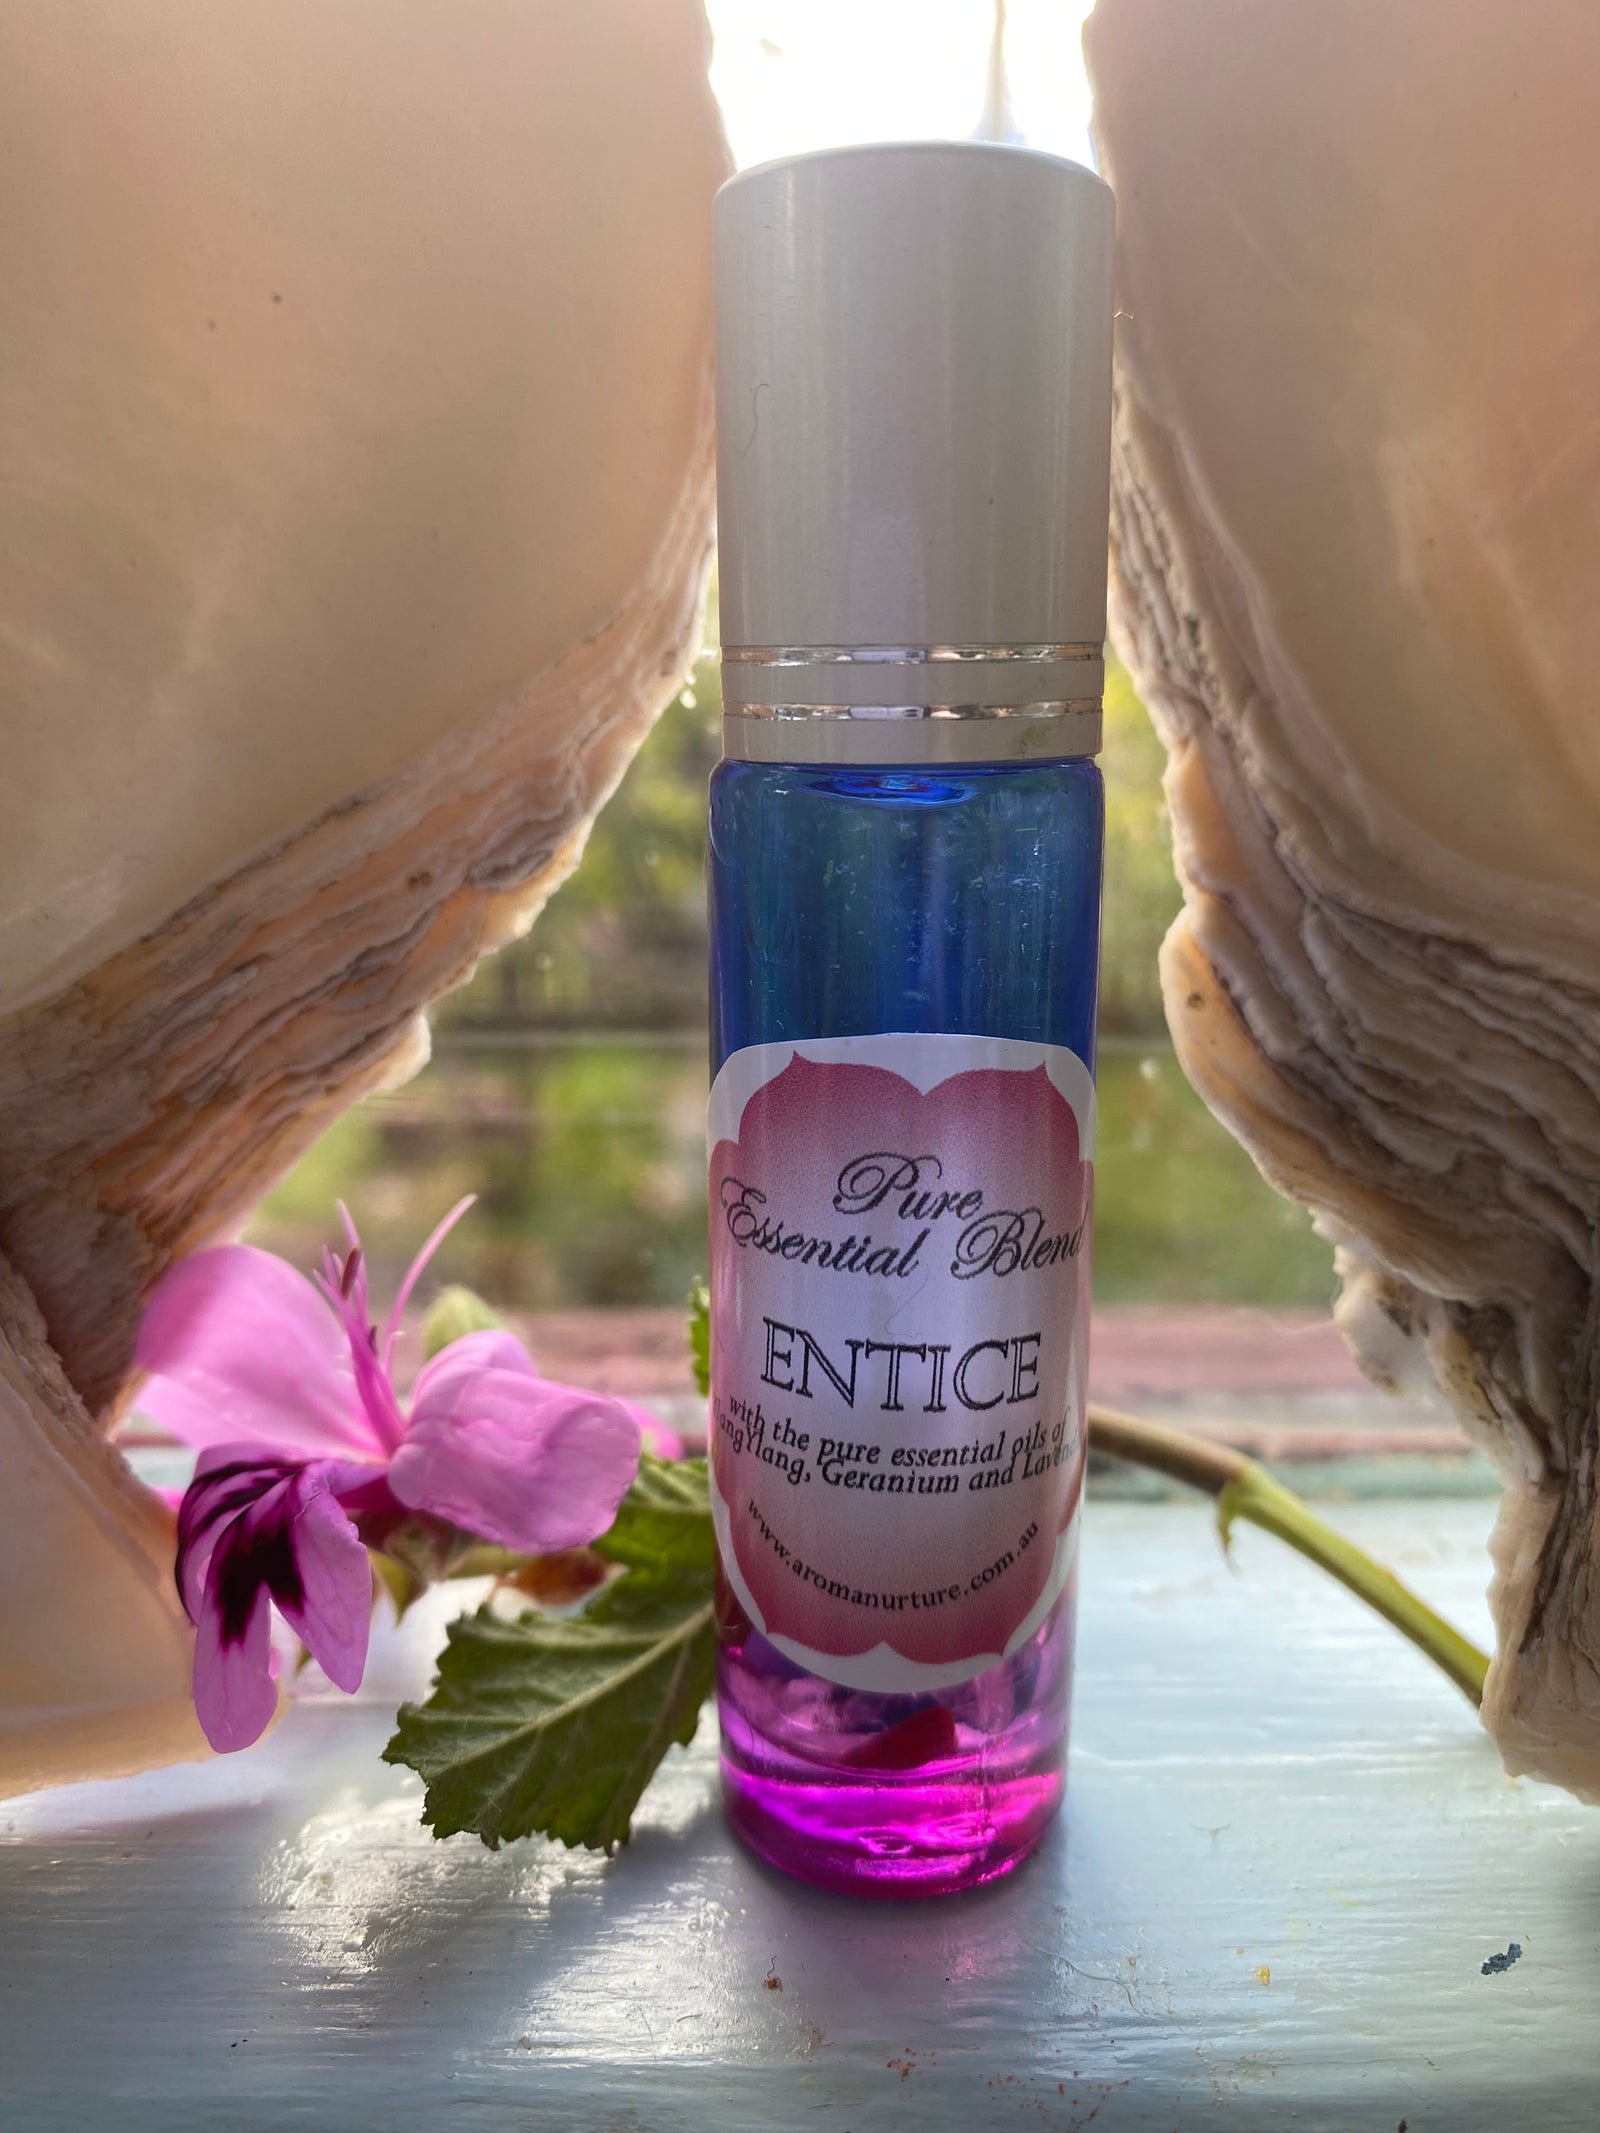 Entice Roll-on blend with Crystal chips.